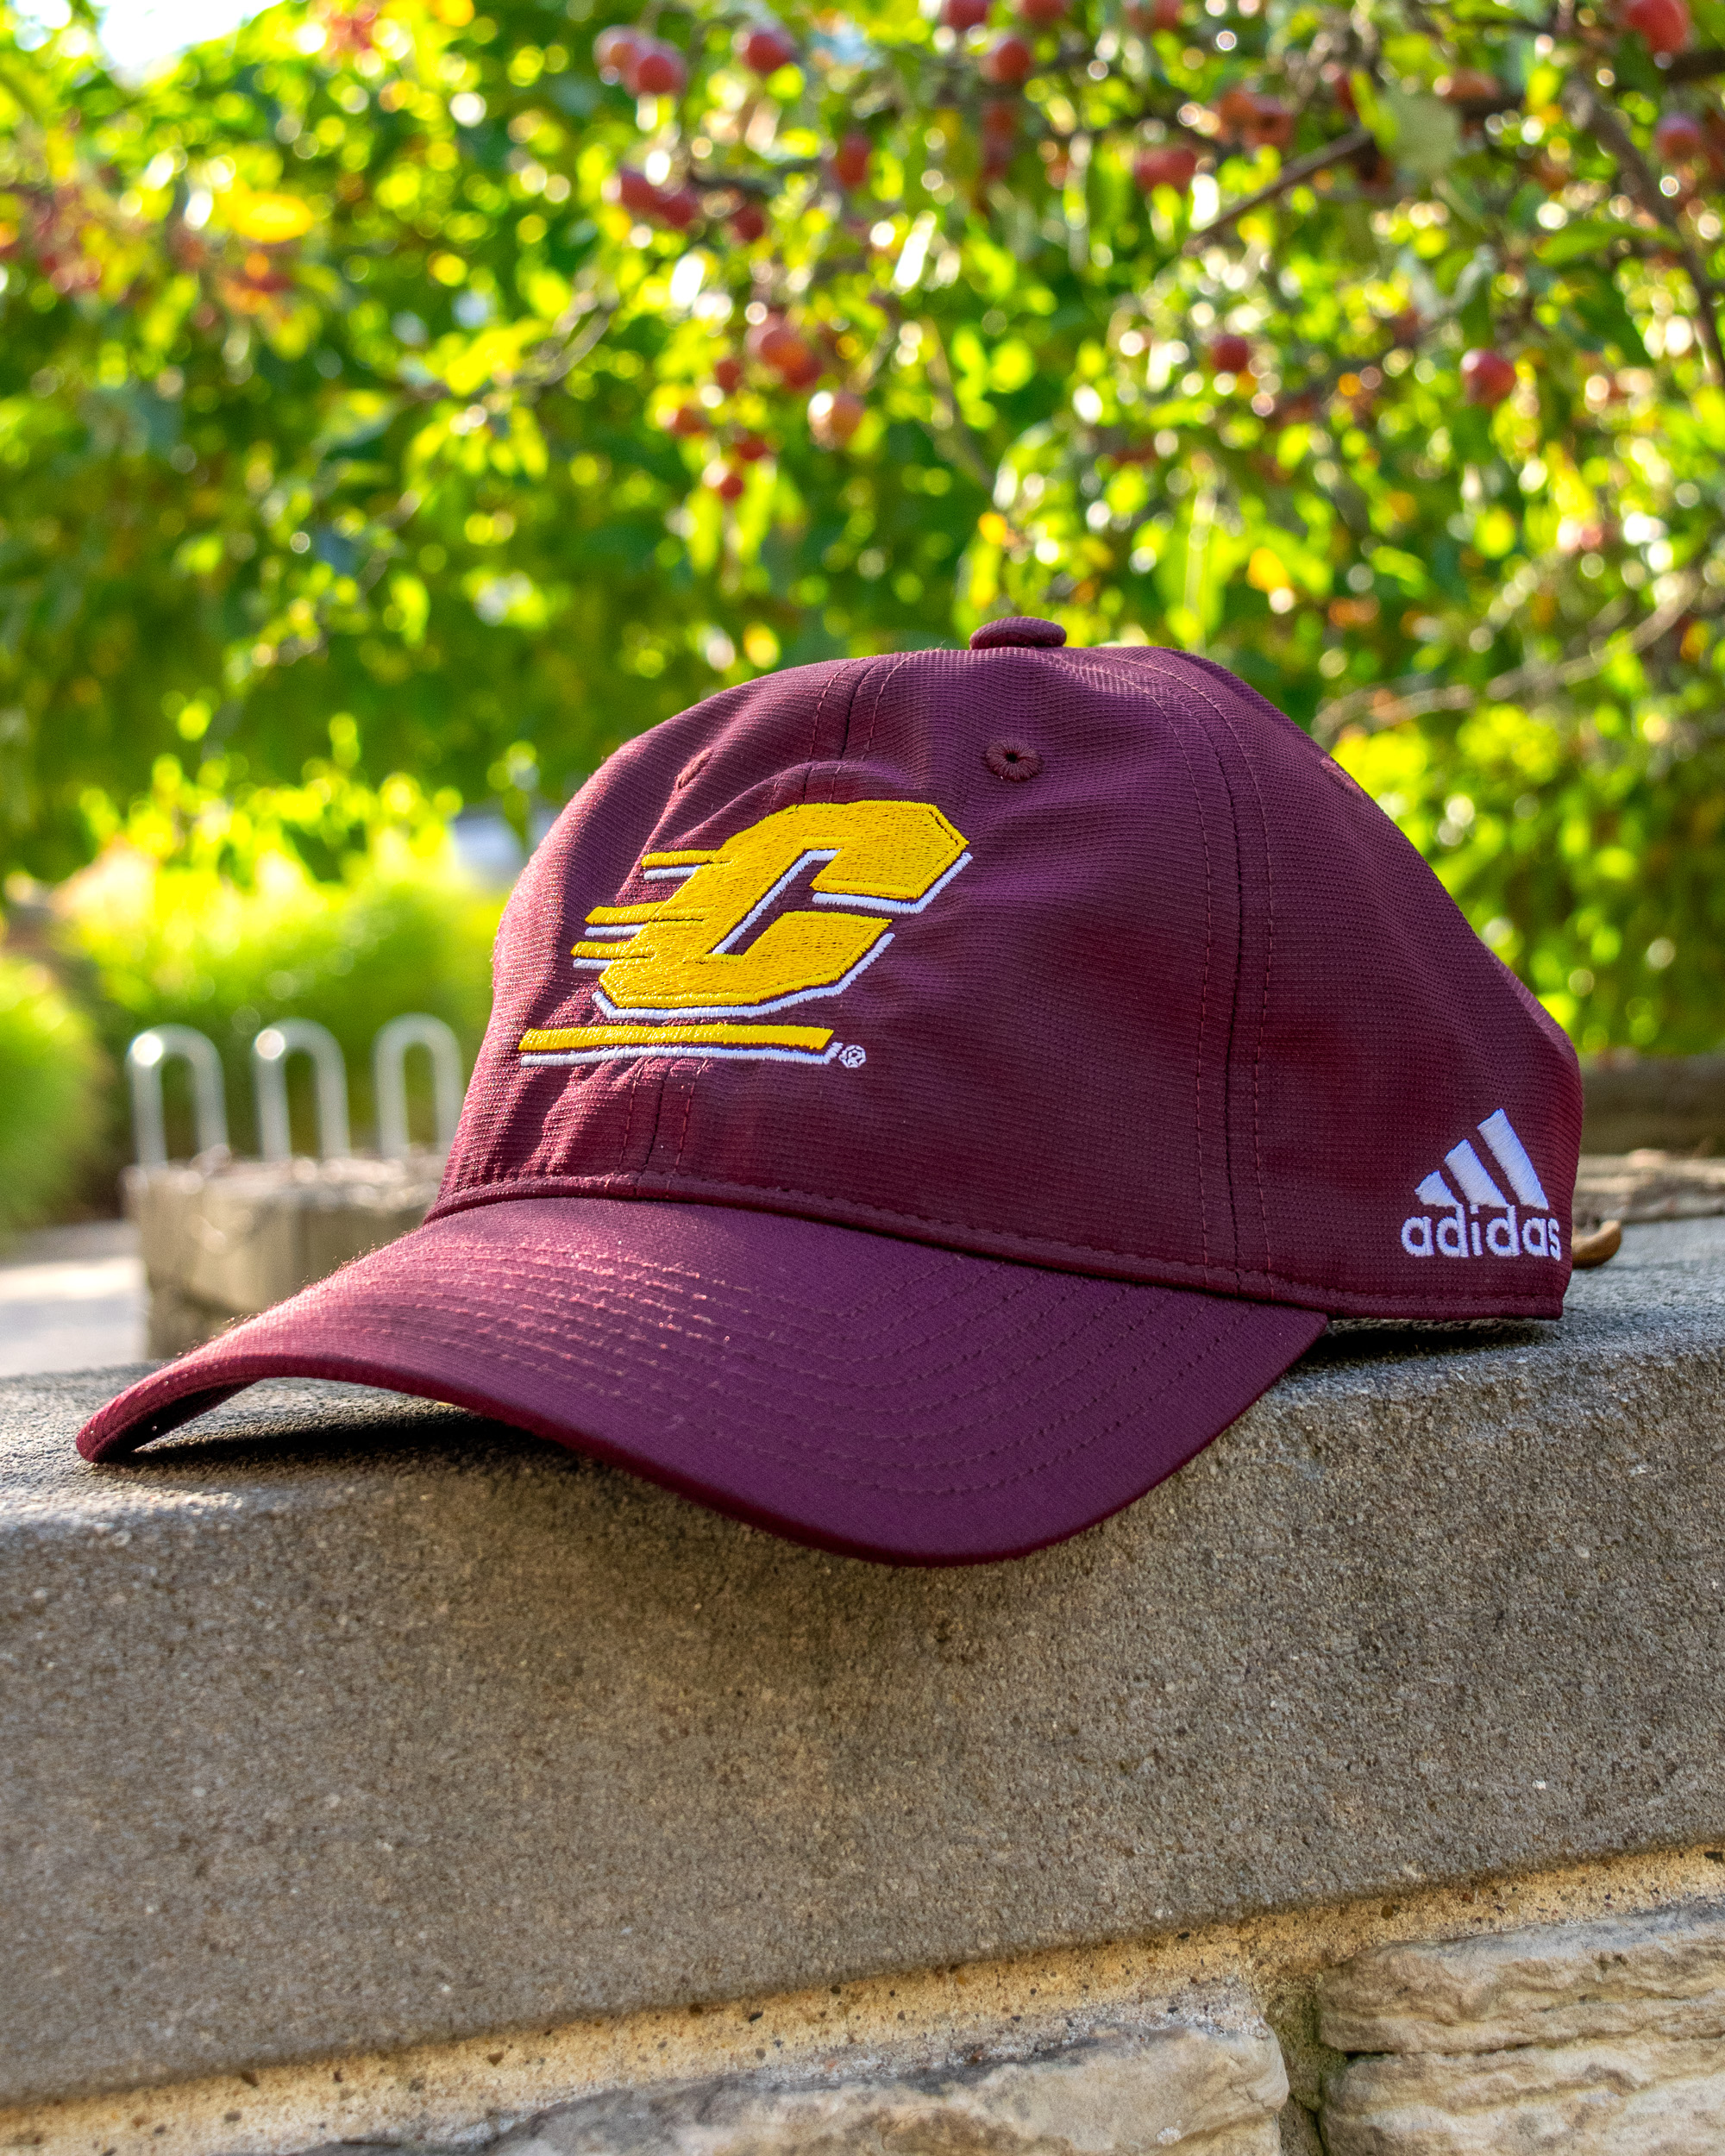 Action C Maroon Performance Slouch Hat<br><brand>Adidas</brand> (SKU 5051758998)